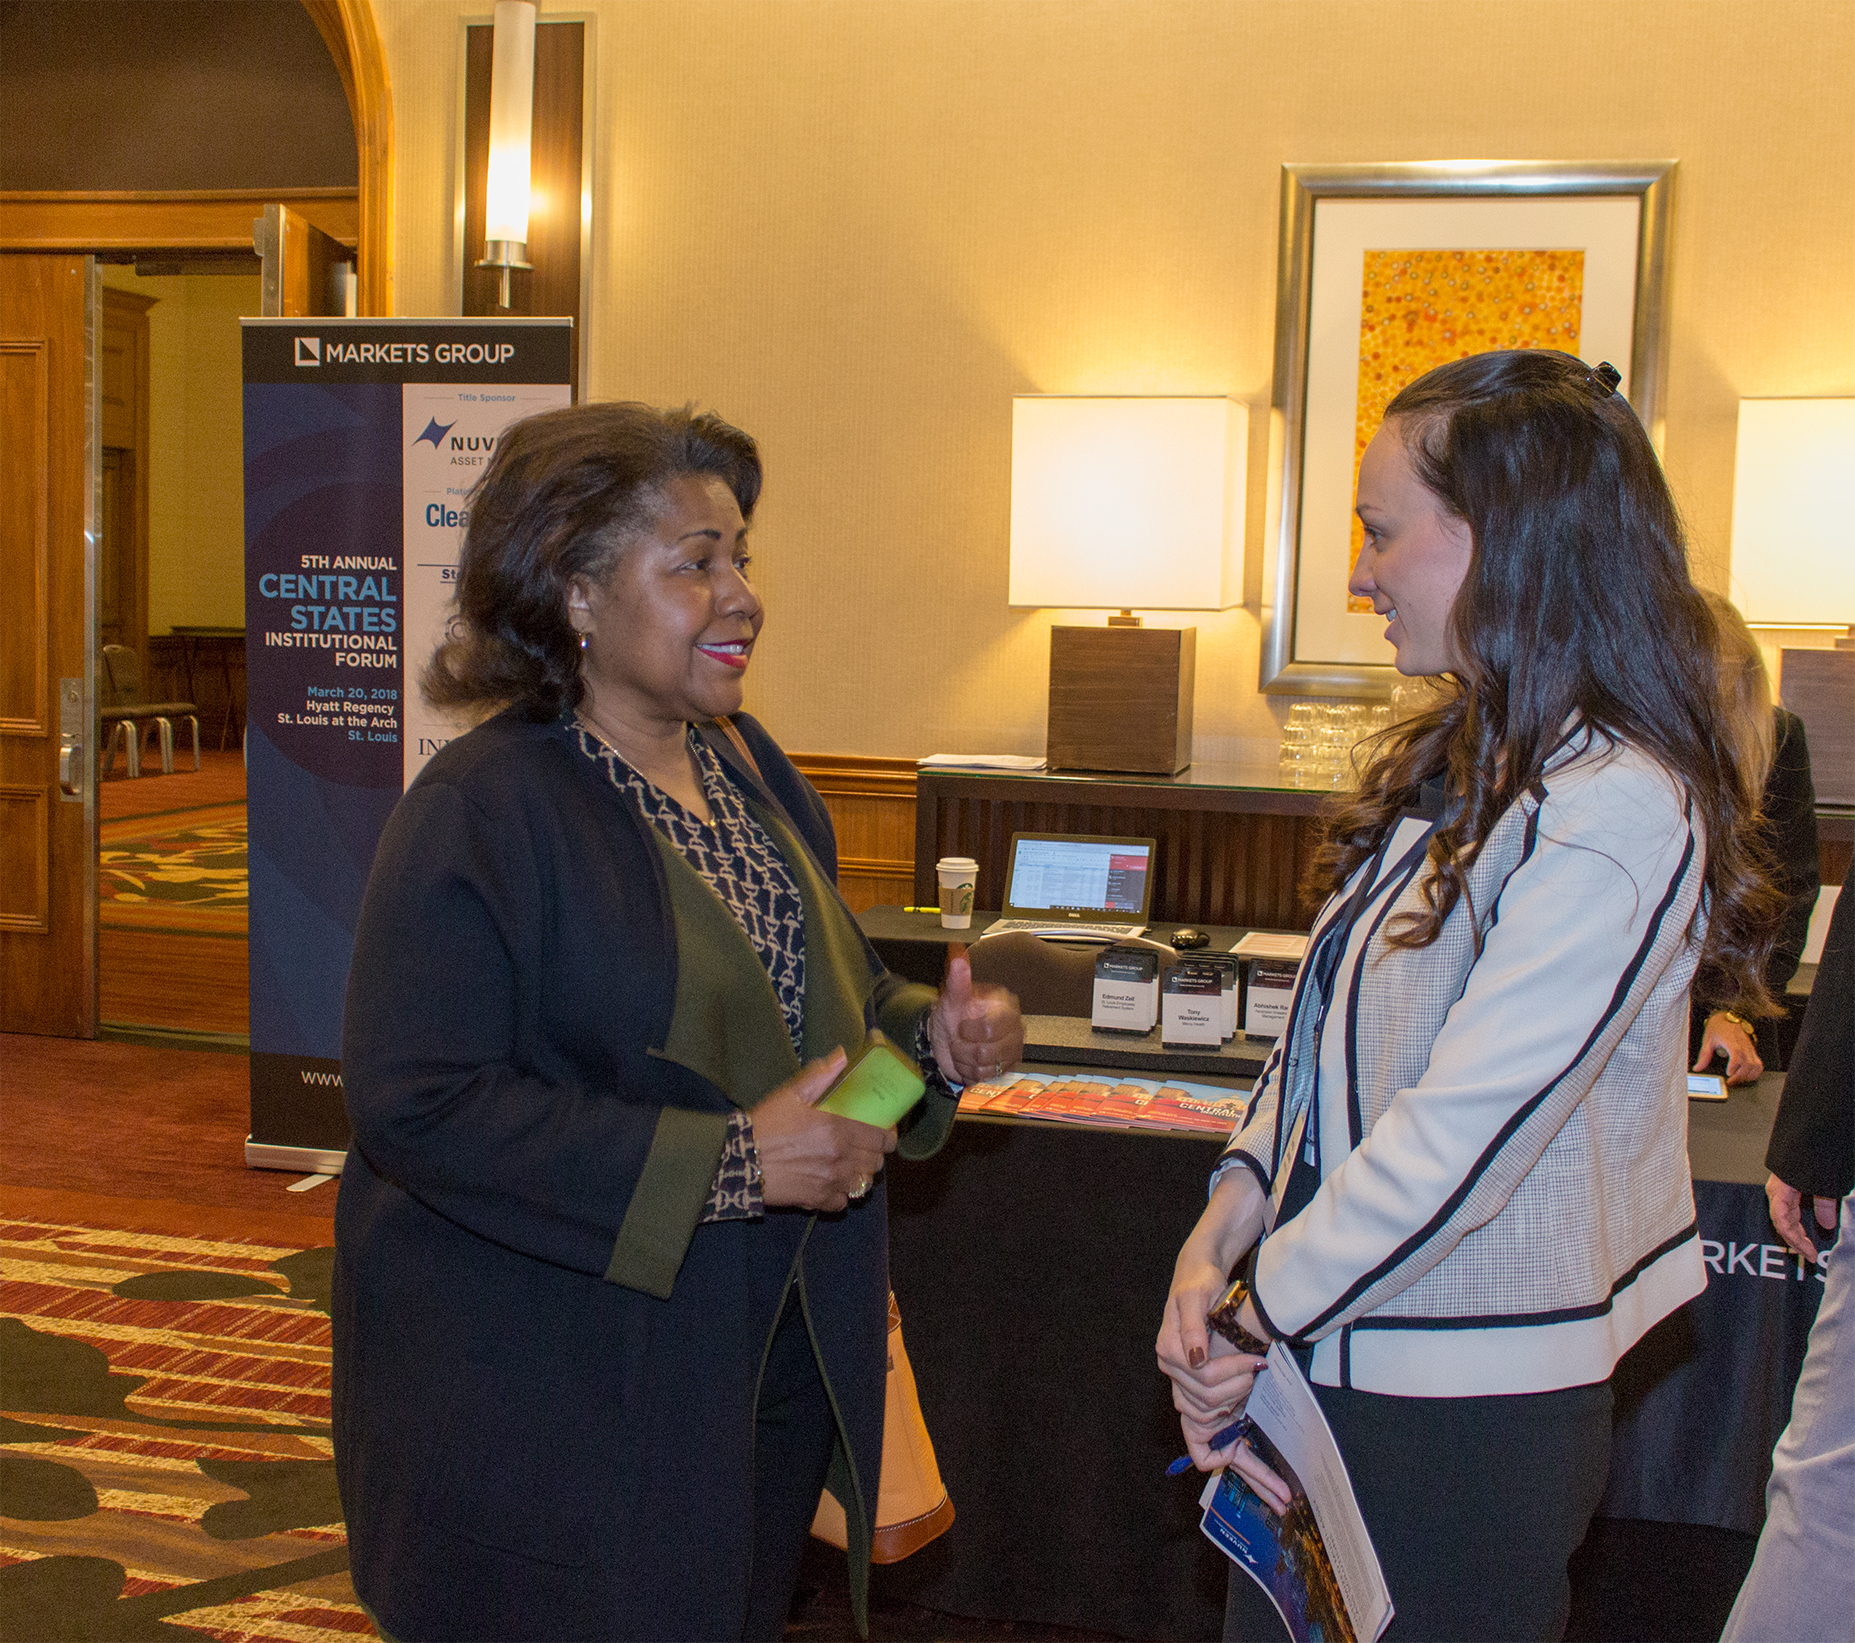 Comptroller Green is greeted by Georgia Quinones of Markets Group at the Central States Institutional Investors Forum.